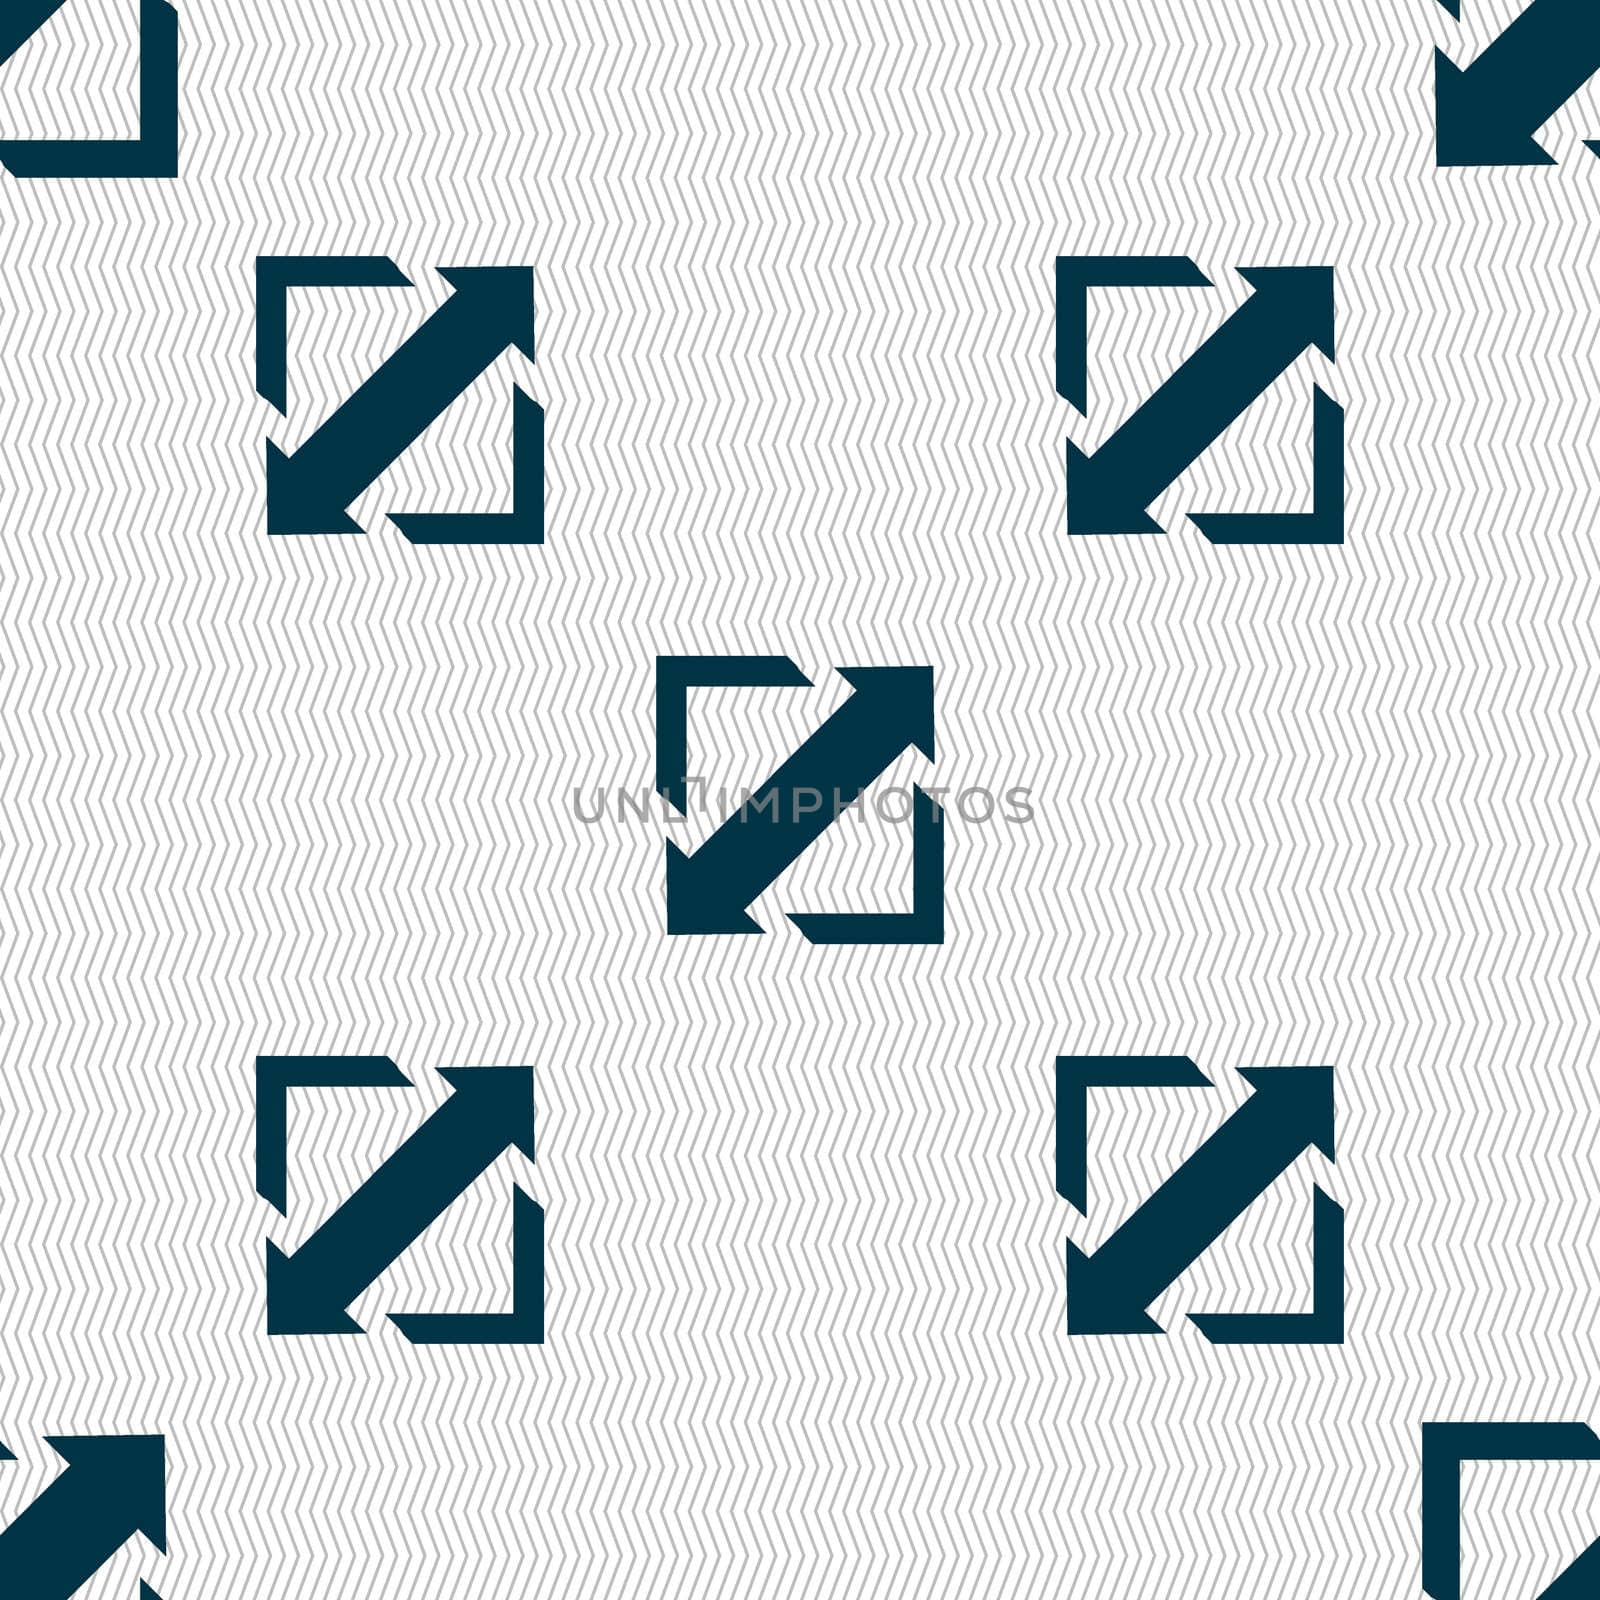 Deploying video, screen size icon sign. Seamless abstract background with geometric shapes. illustration